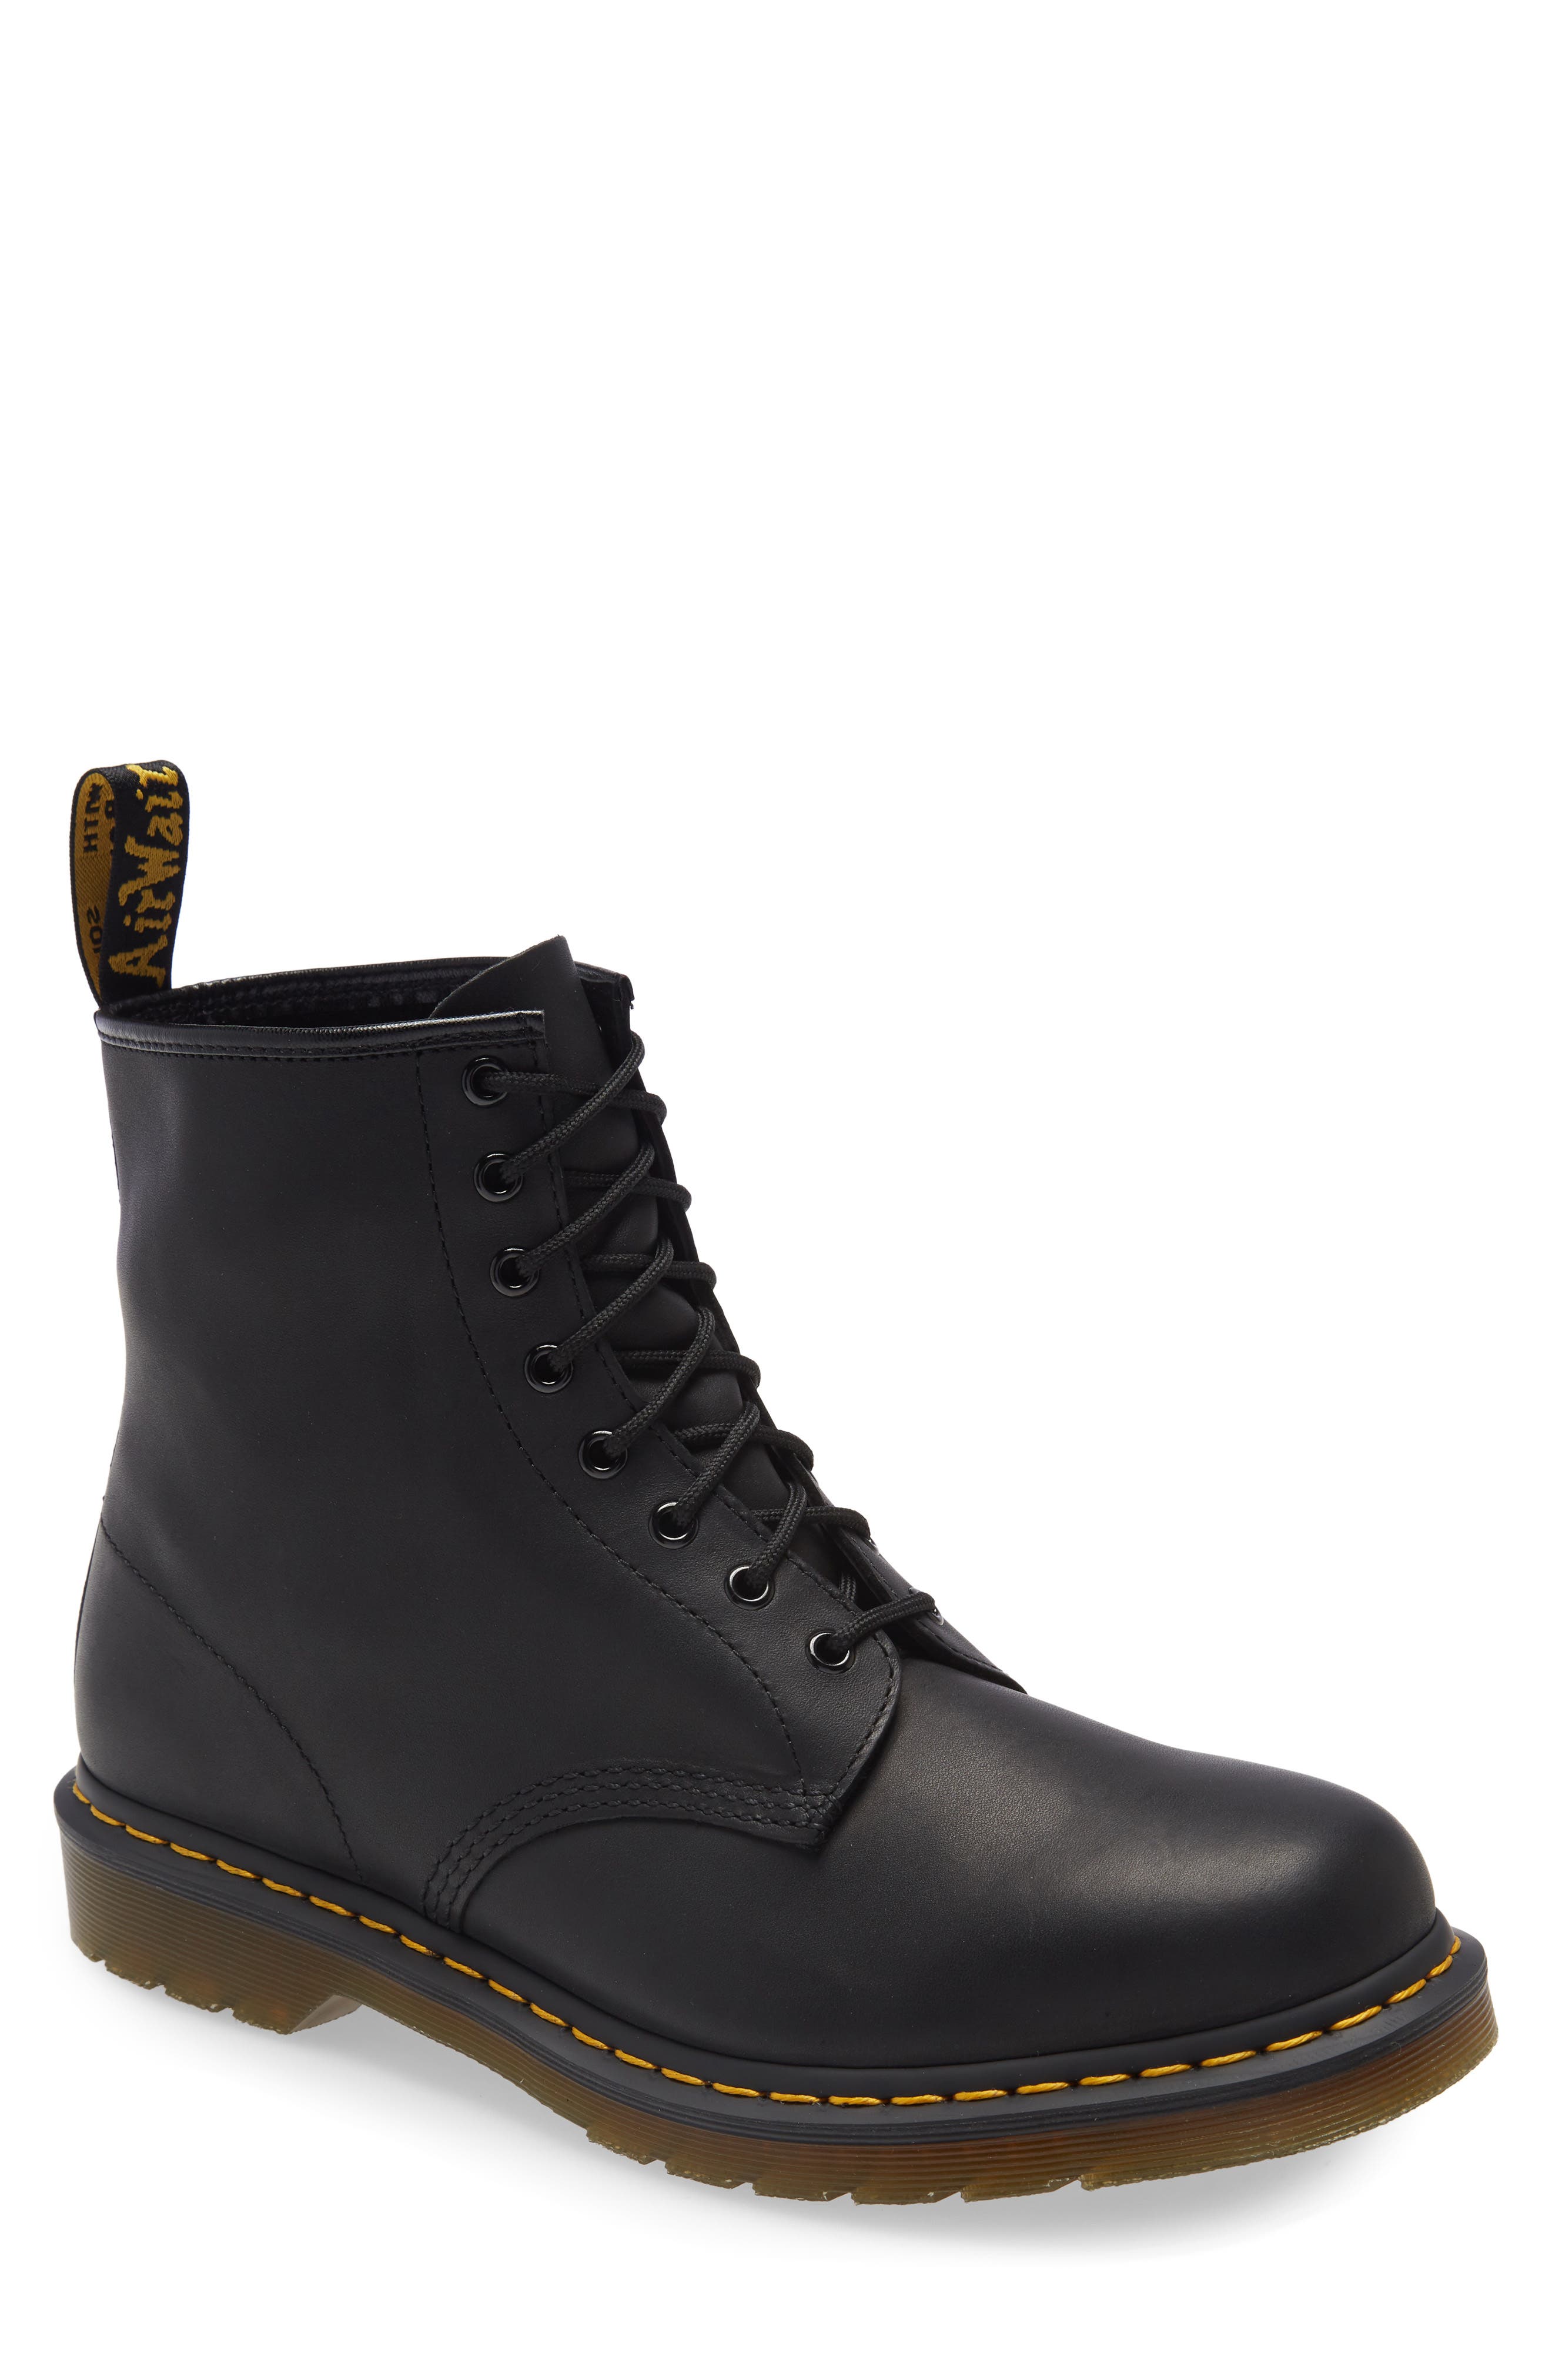 Dr. Martens '1460' Boot in Black Smooth at Nordstrom